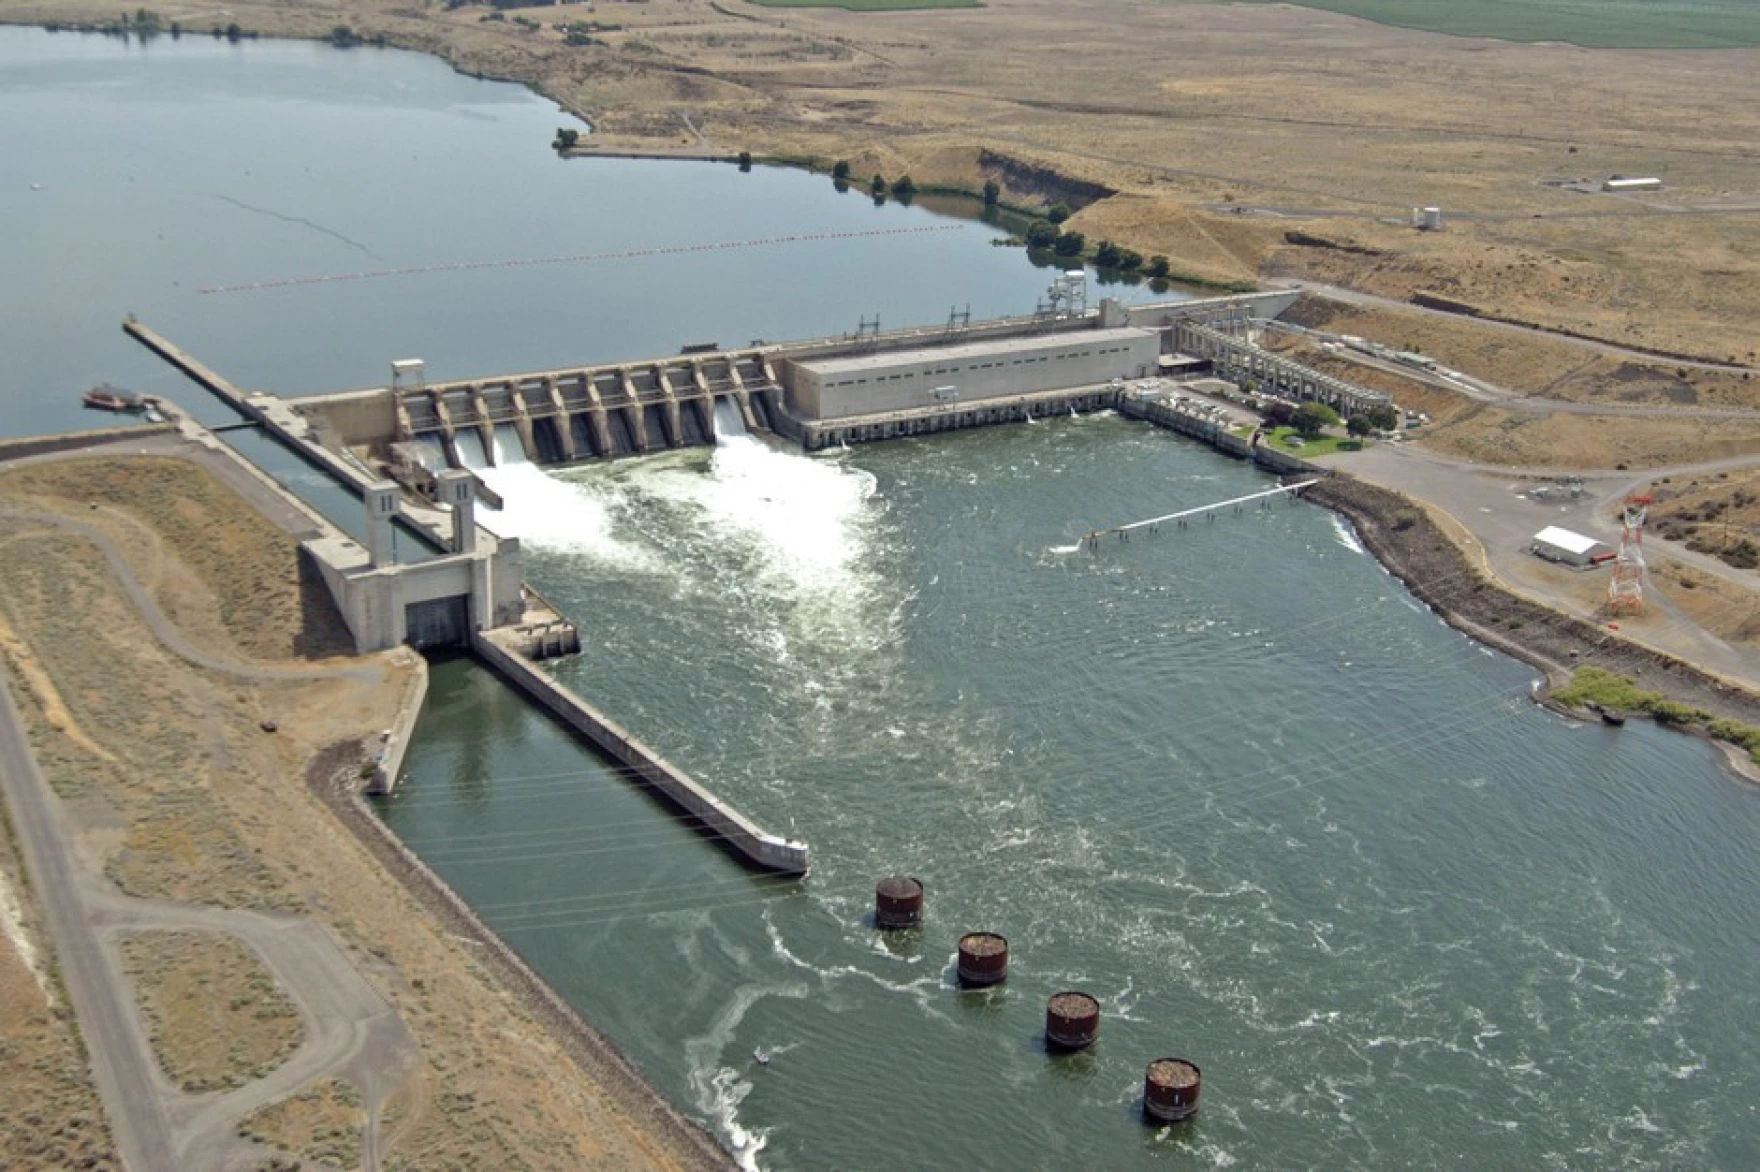 Ice Harbor Dam on the Snake River. Breaching the Snake River dams is one major way to protect salmon, according to a final federal report announced Friday on salmon and steelhead recovery in the Columbia River Basin